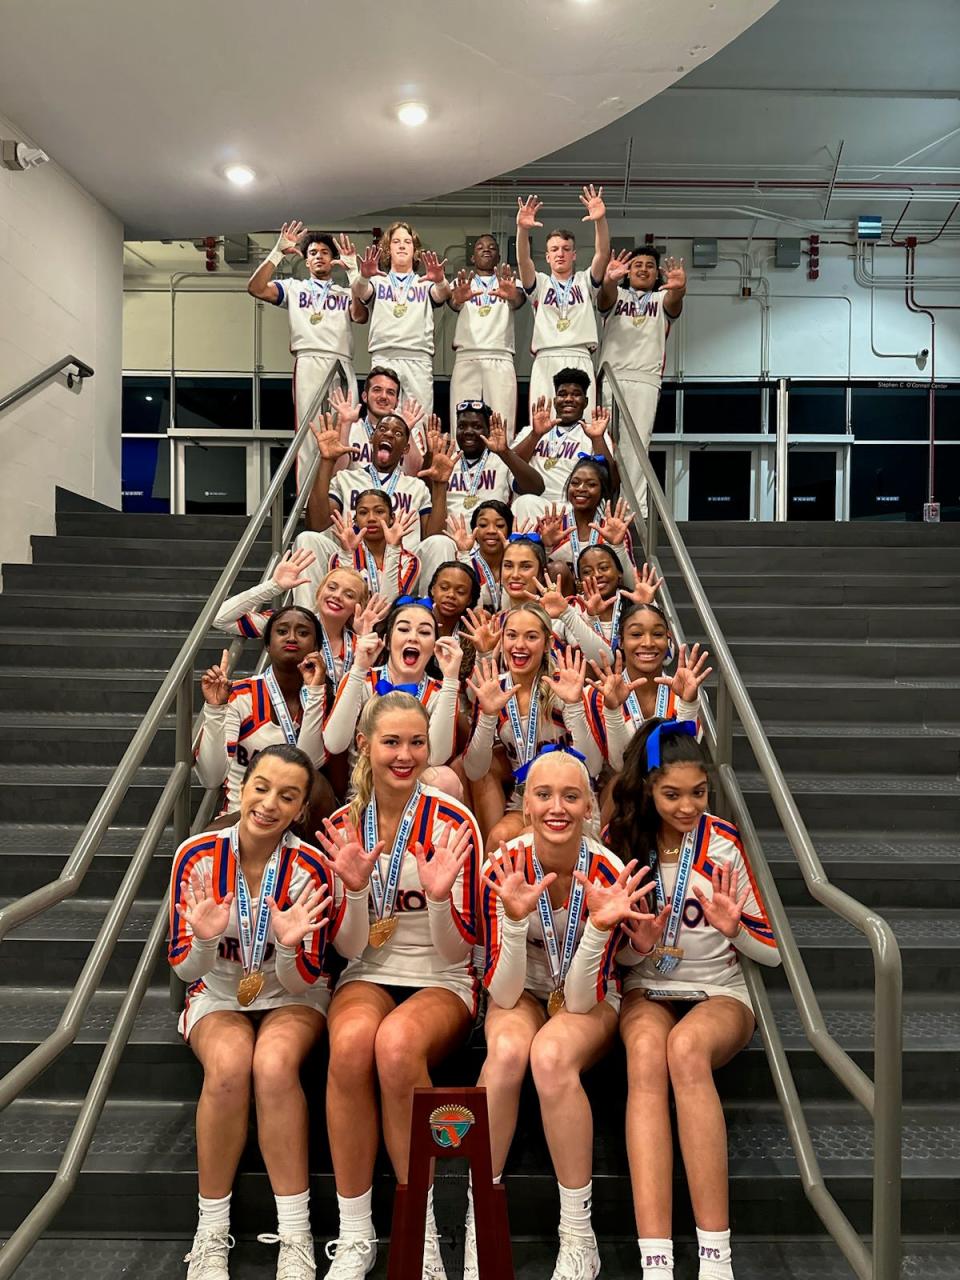 Bartow carried on tradition over the weekend. In the front row are: Catalyna Sanchez Kyleeana Mullis, Lilyana Helms, and Shavelly Diaz. In the second row are: Meah Fullington, Olivia Lacson, Aubree hays and Ryan Williams. In the third row are: Brooke Dumke, Paris Taylor, Mary Elizabeth Holby and Makayla Brown. In the fourth row are: Arroyana Riggle, Zy’keri McGowan and Ja’nyshia Graham. In the fifth row are: Kemonte Foster, Jay Greear, Germarias Simmons and Henry Thompson. And in the sixth row are: Isaac Battle, Zack Sikorski, Travon Lurry, Jaden Harper and John Victor Acosta .